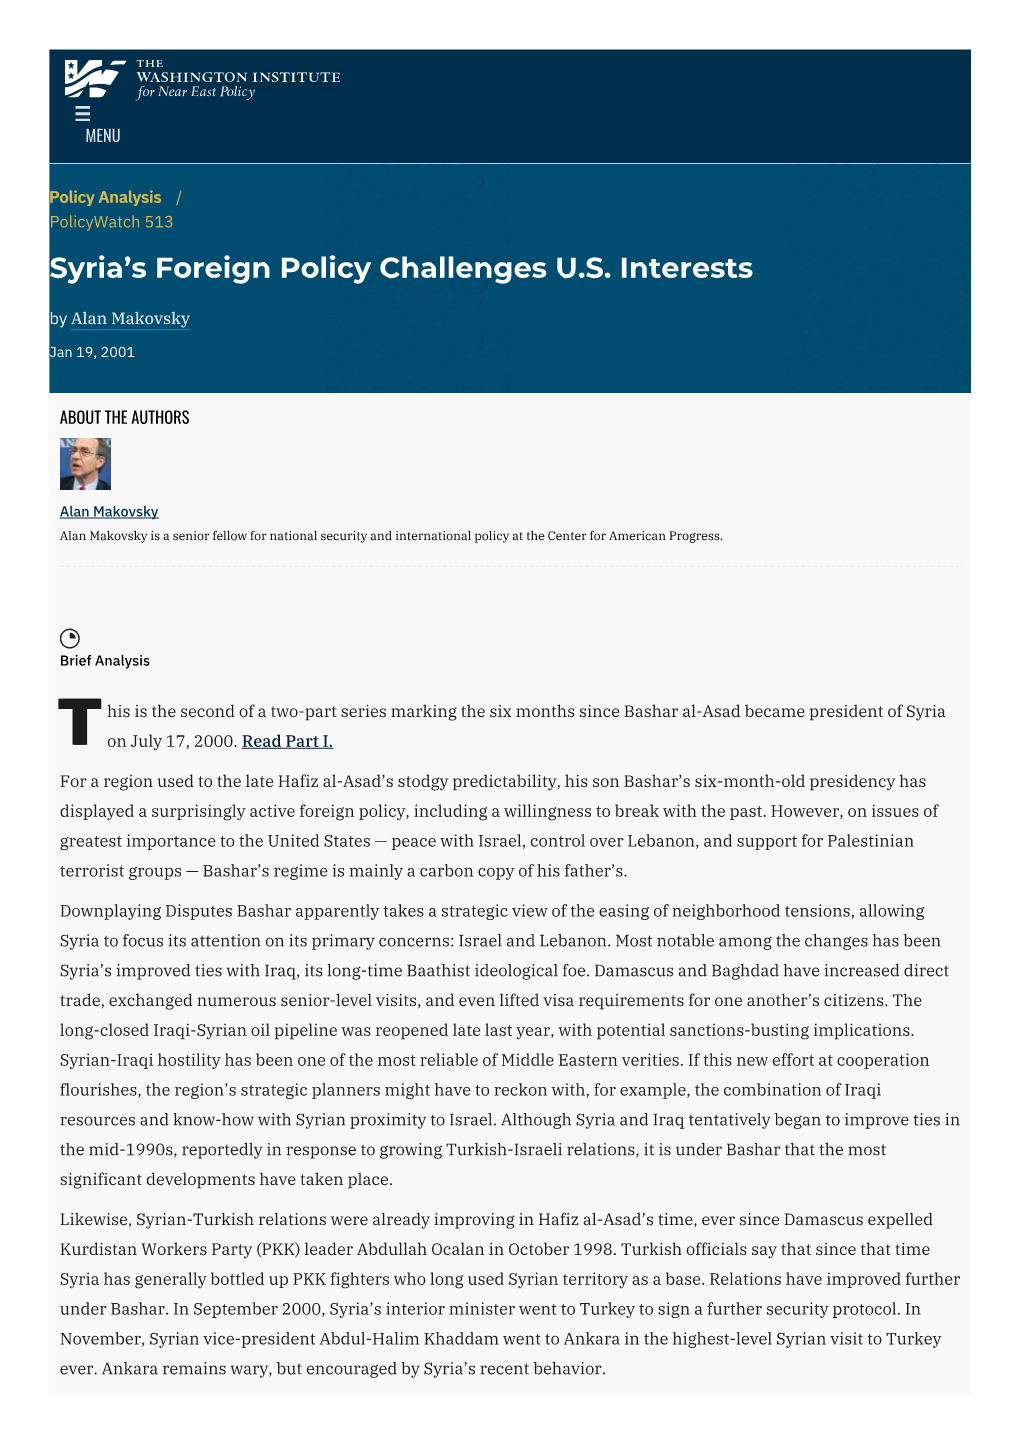 Syria's Foreign Policy Challenges U.S. Interests | the Washington Institute